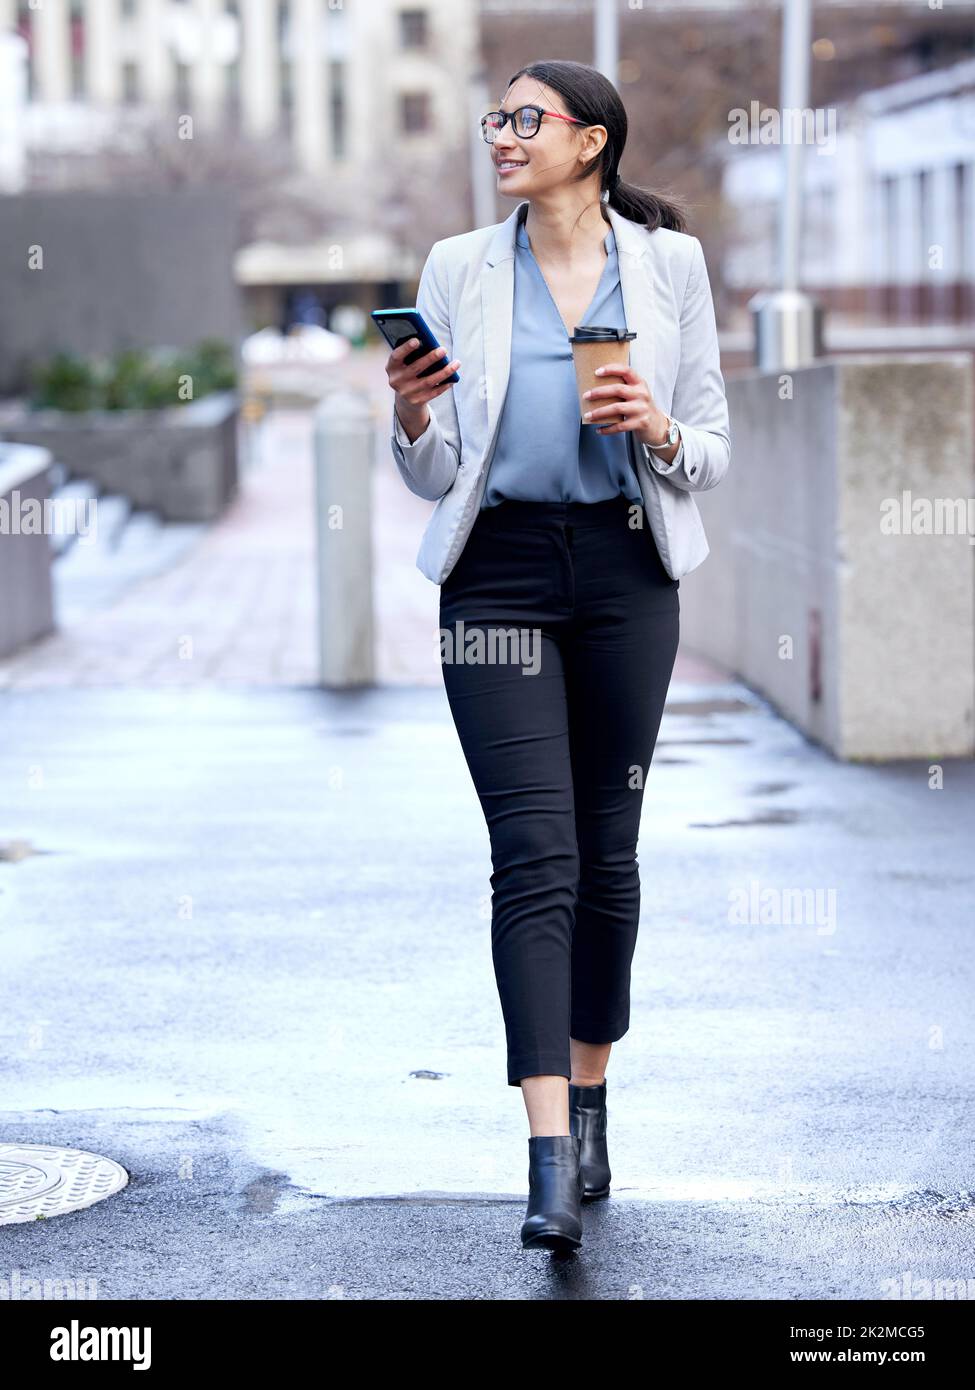 No roads where Im going. Shot of a young businesswoman making her way to work. Stock Photo